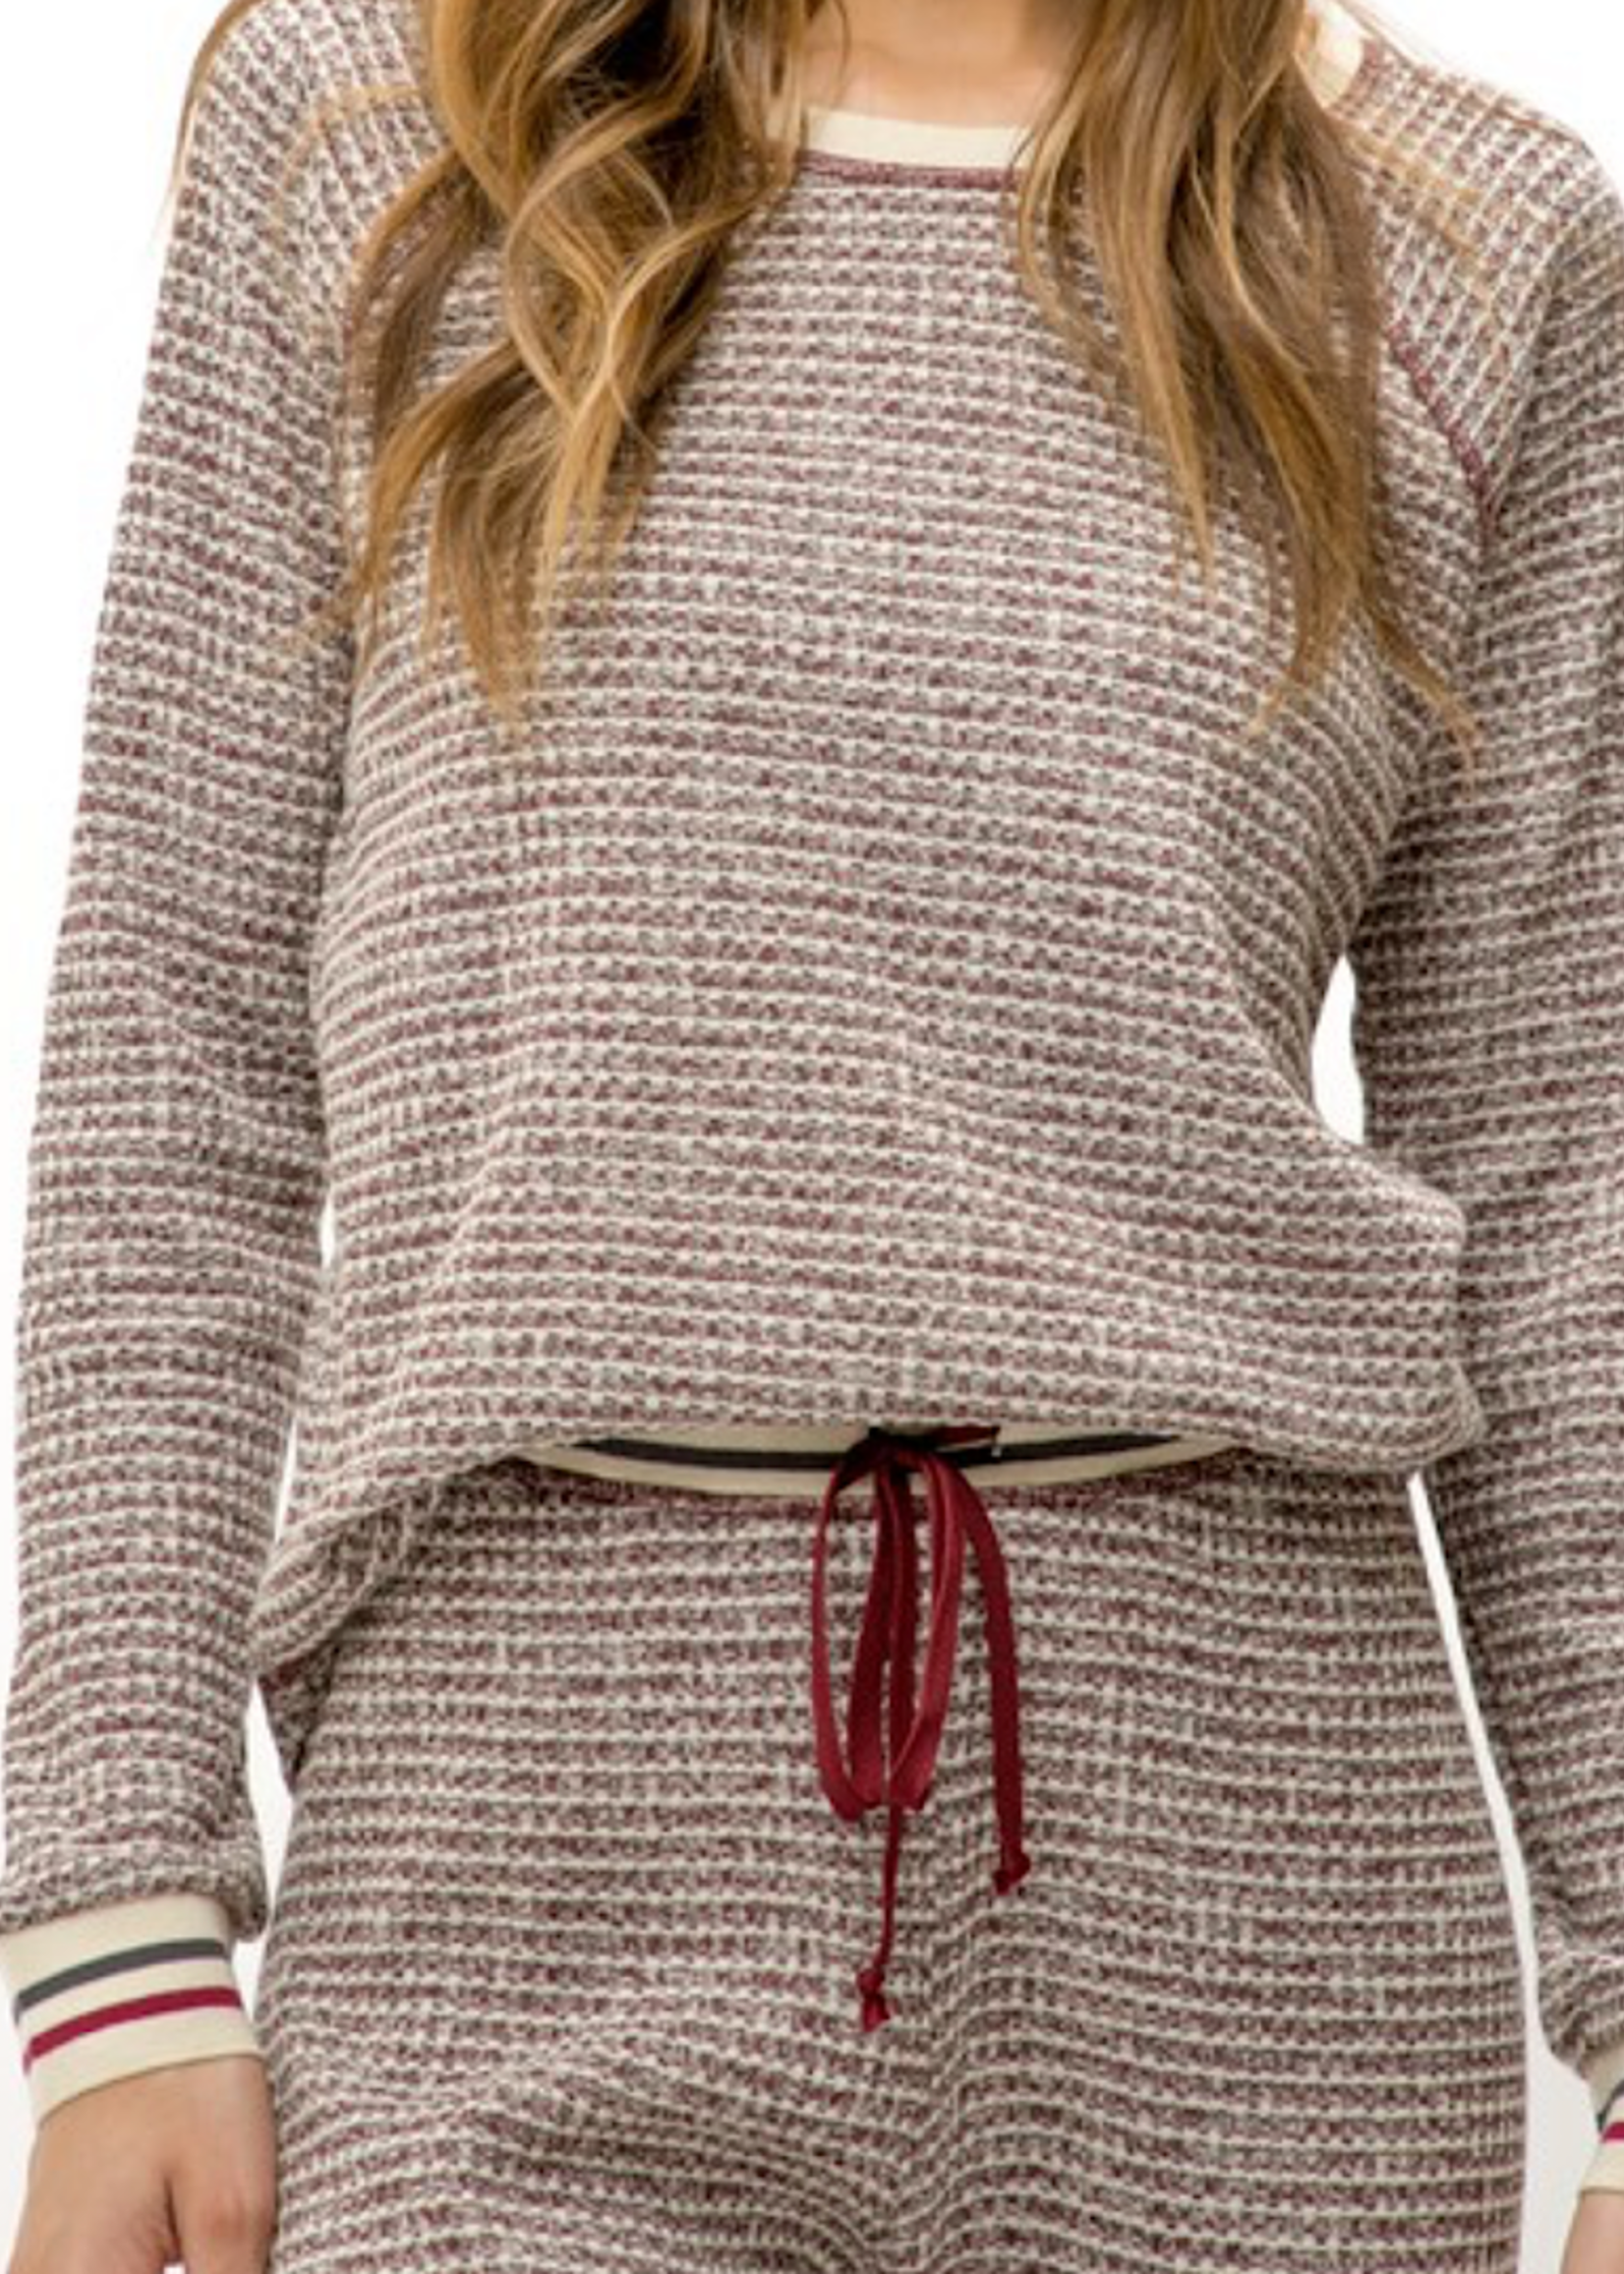 Burgundy Mix Waffle Knit Raglan Top with Striped Bands